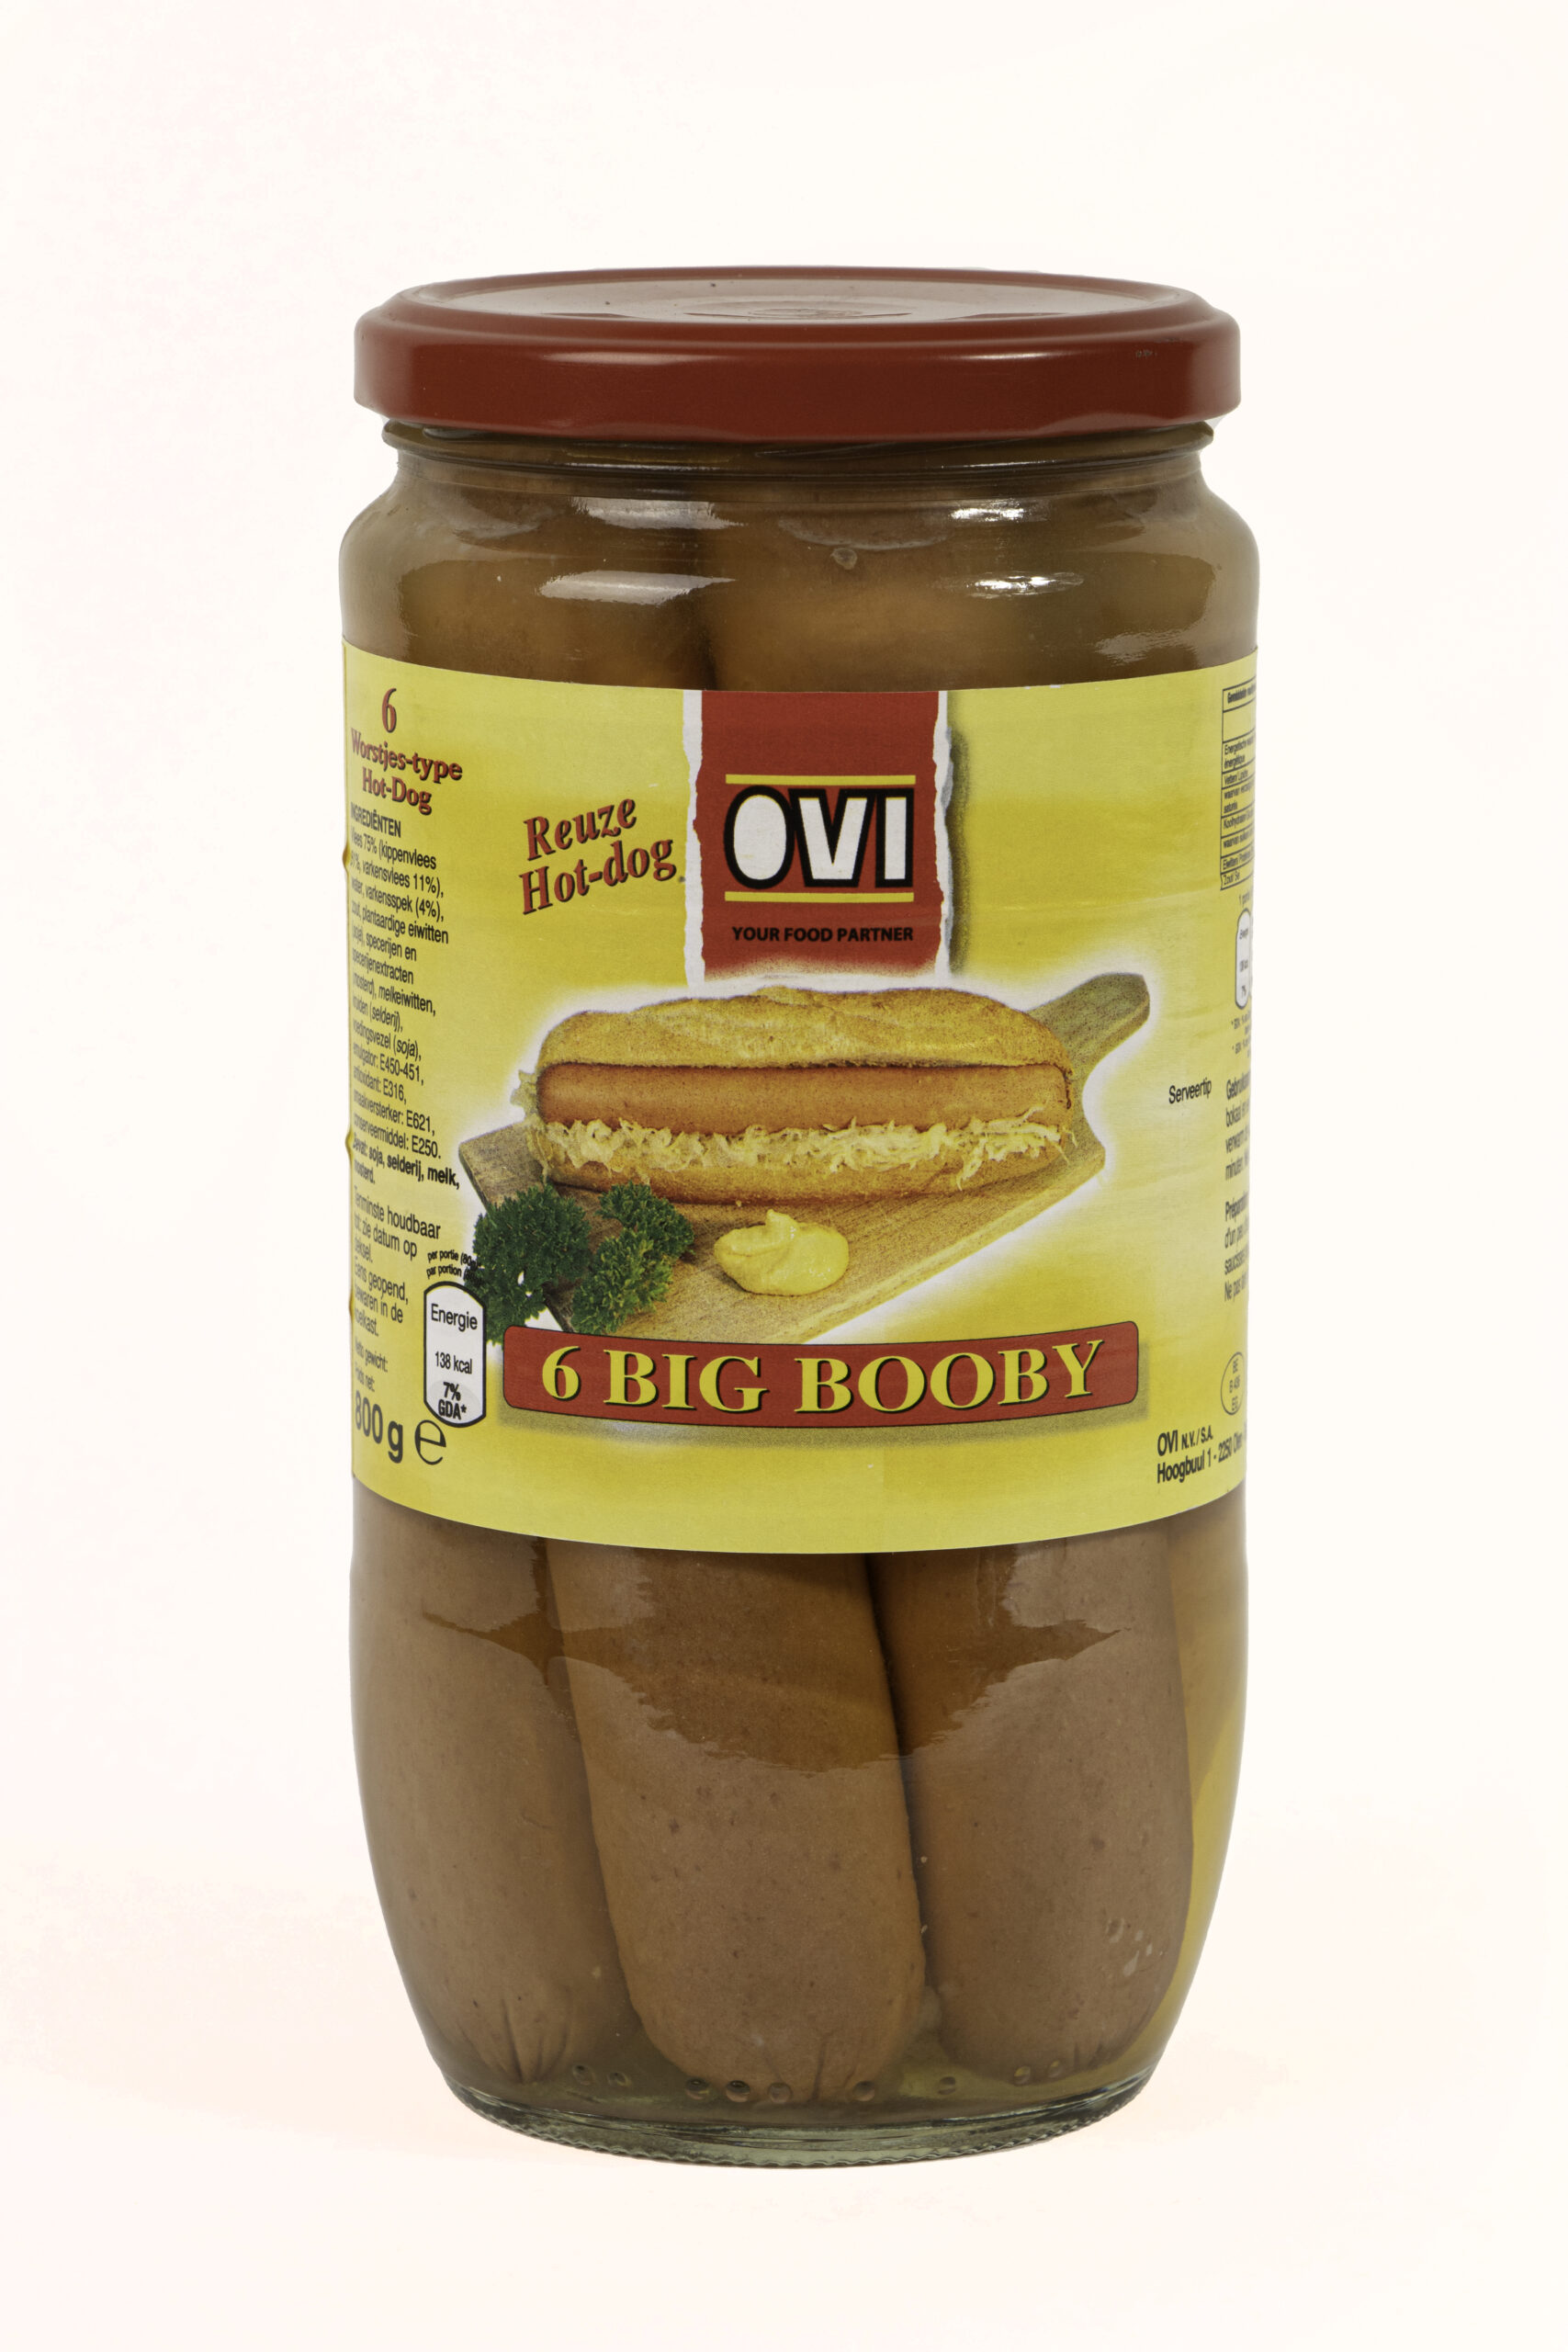 40182 Hot Dogs Big Booby 6 X 80g